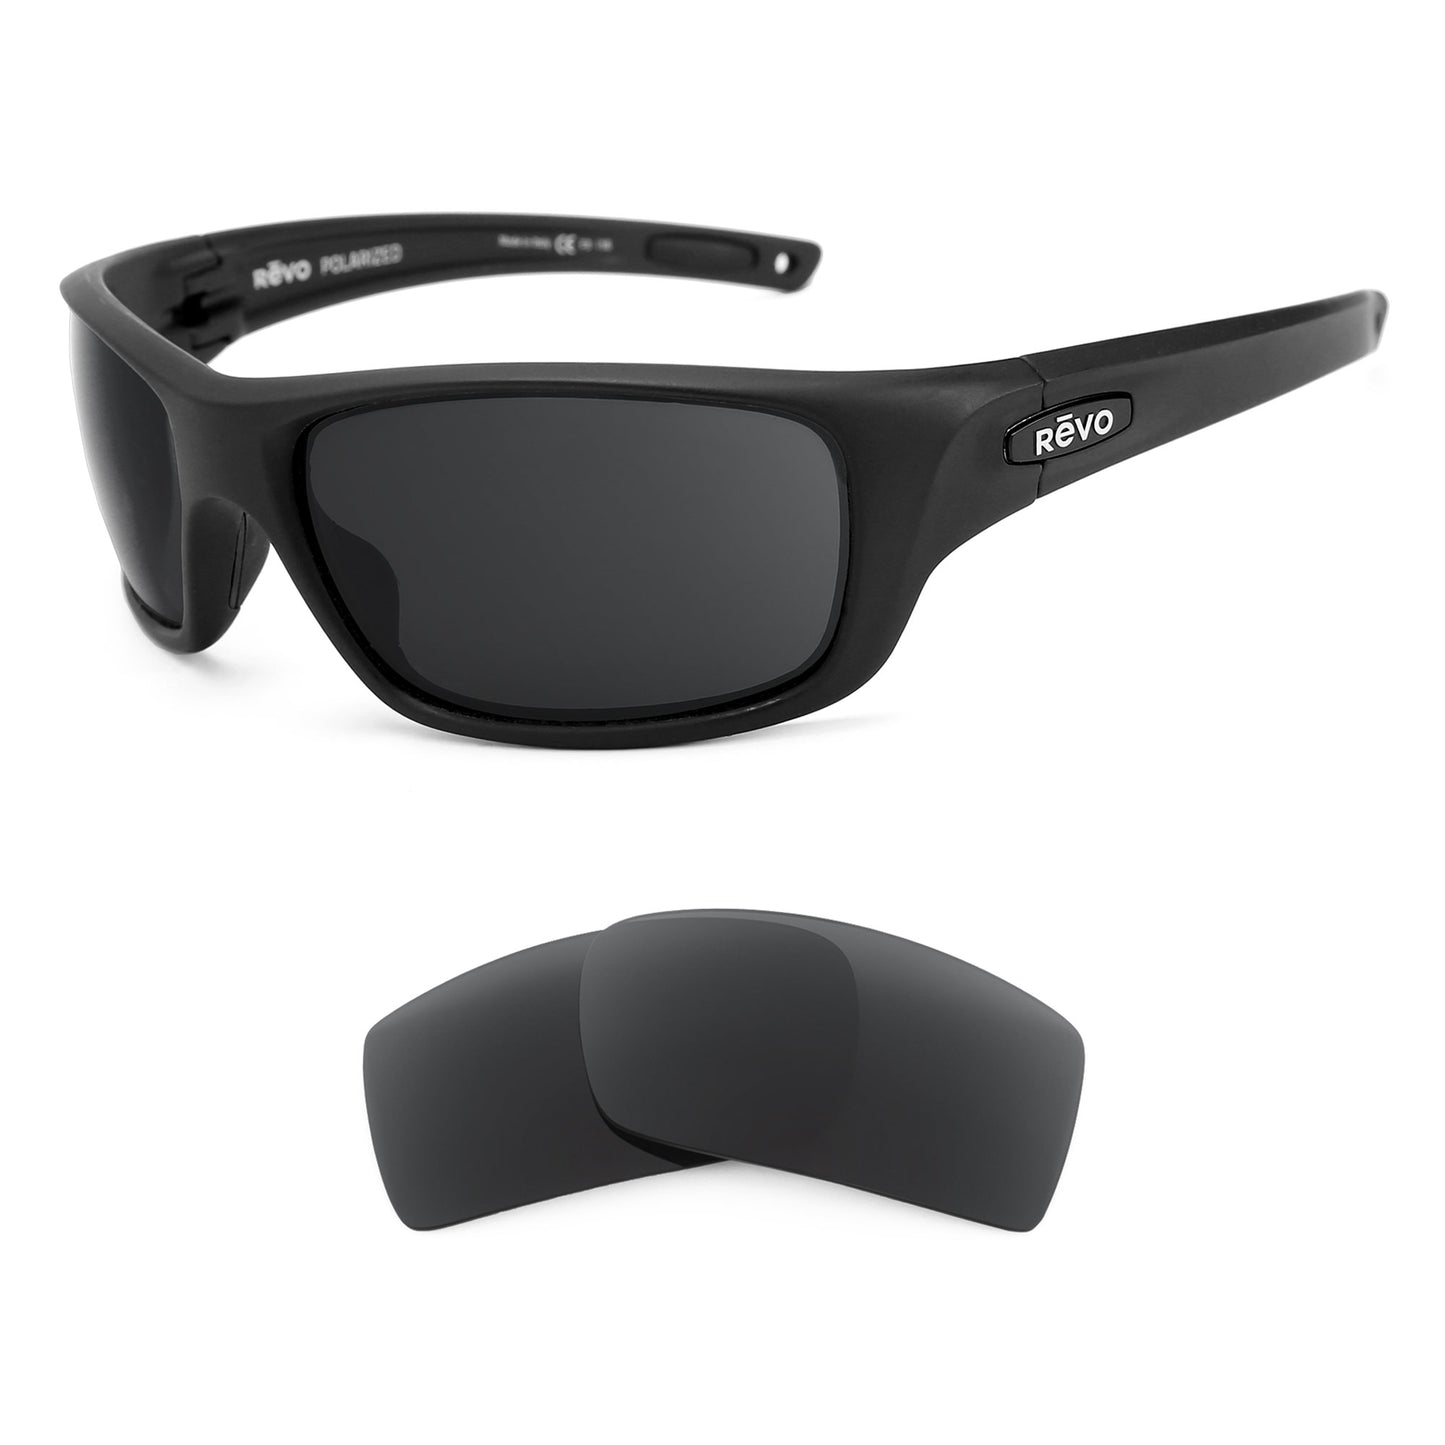 Revo Guide II RE4073 sunglasses with replacement lenses